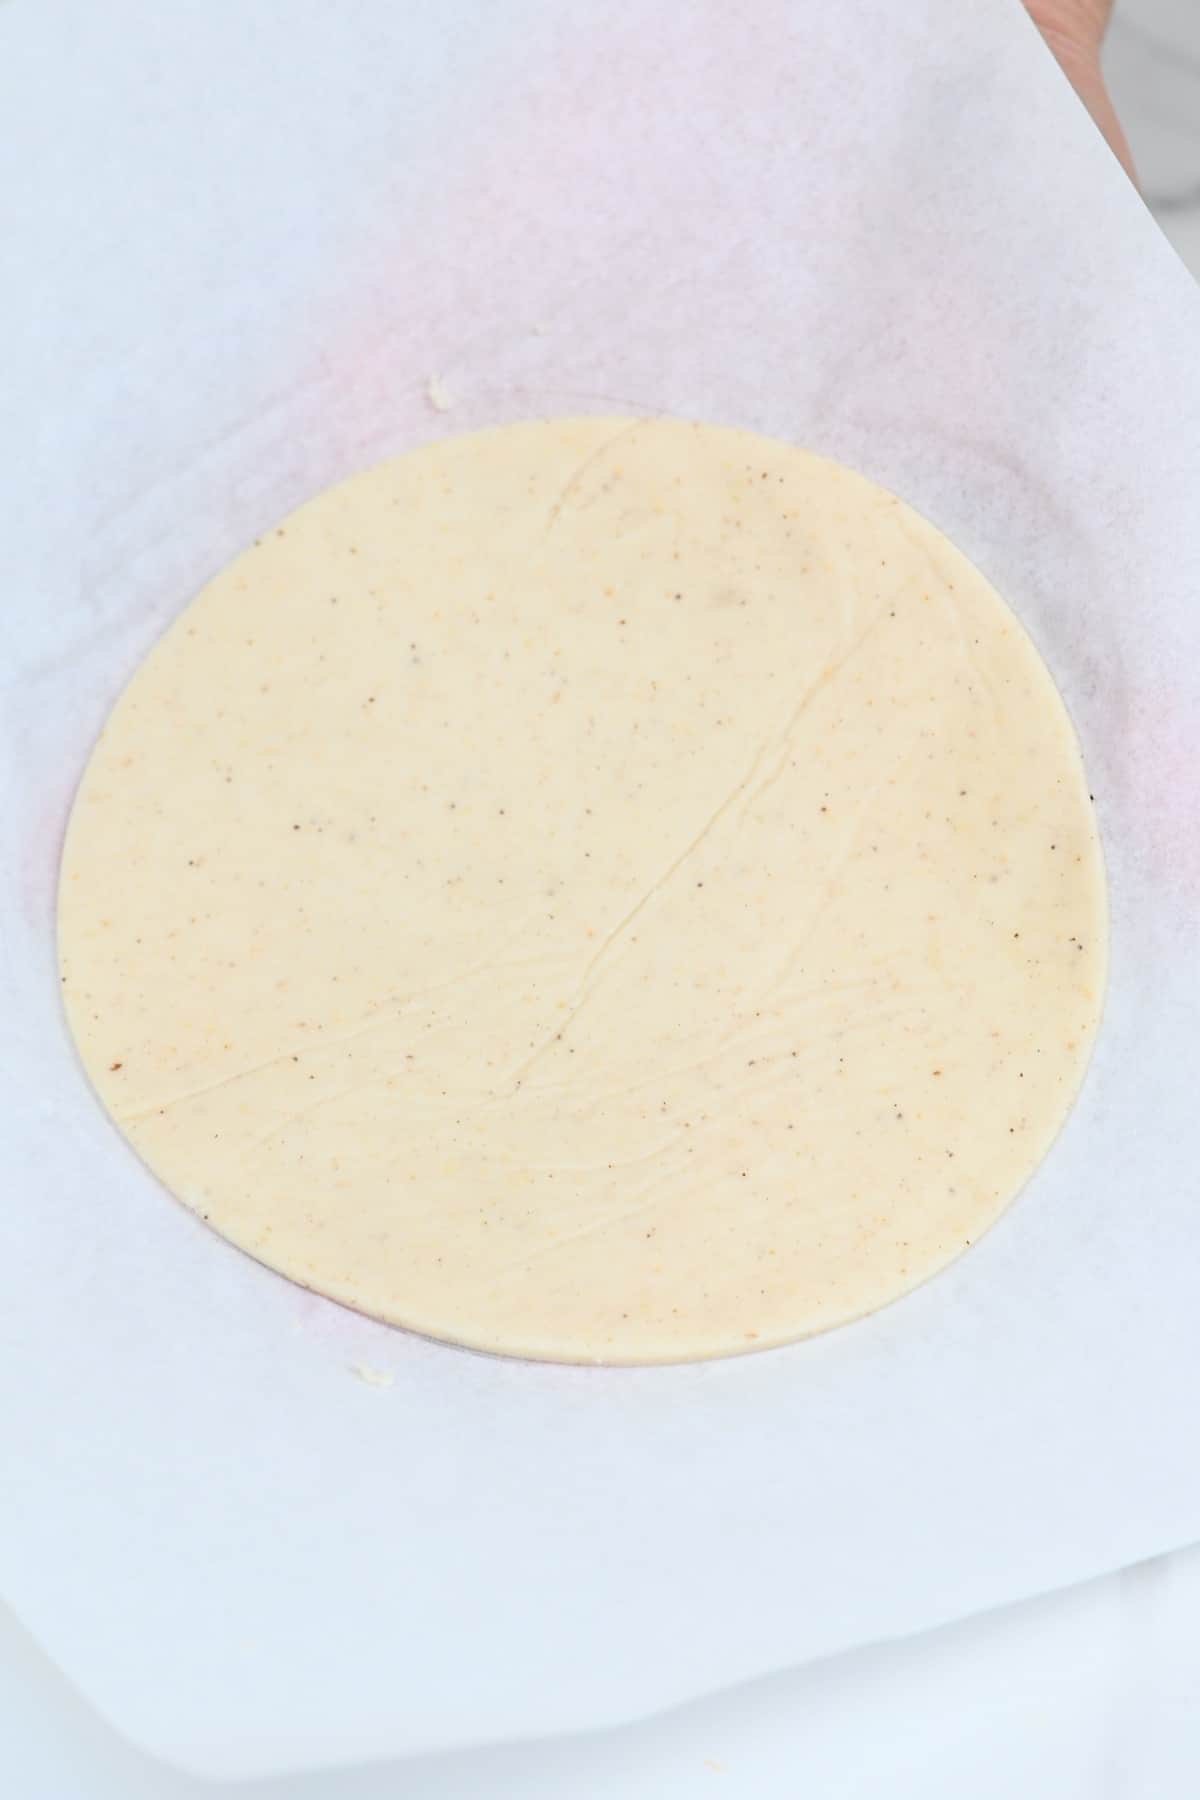 Shaped corn tortilla ready to cook